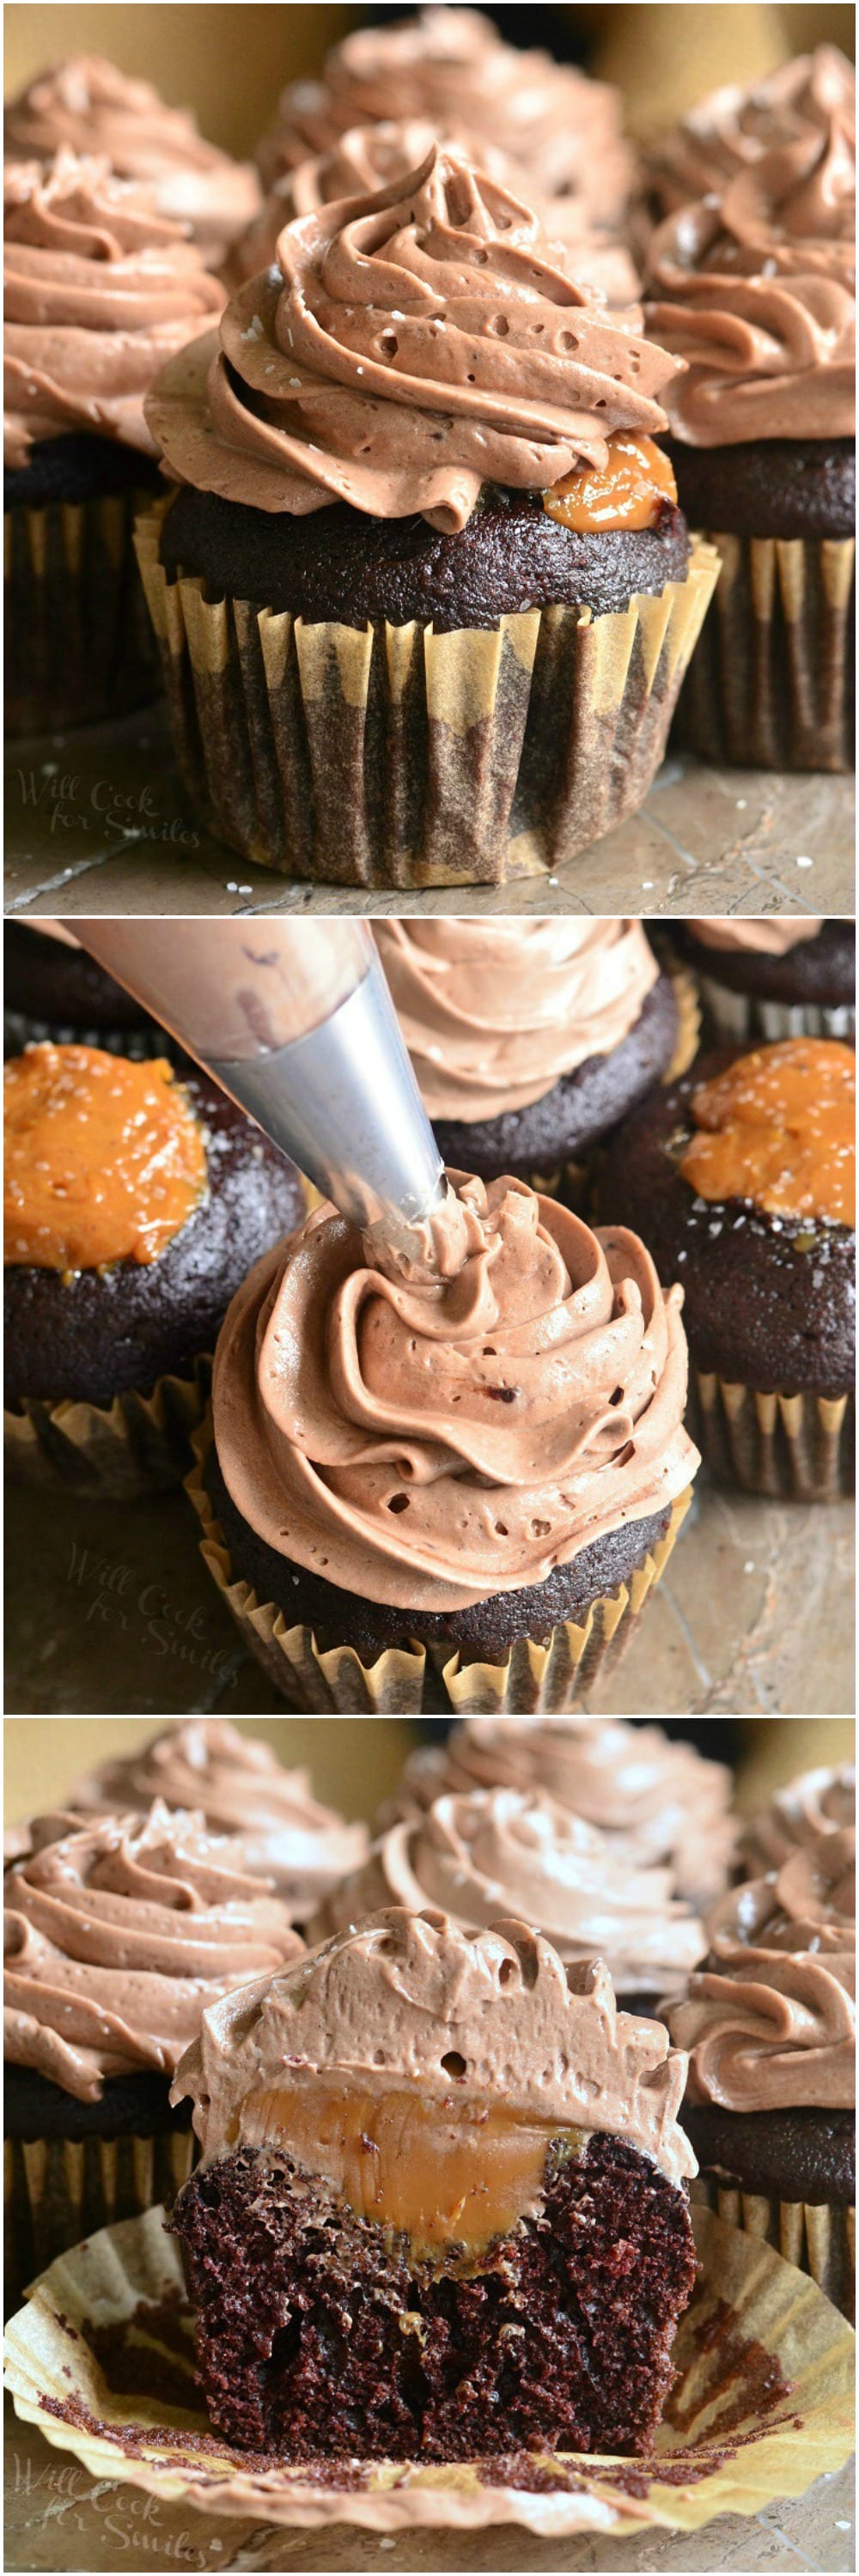 Chocolate Cupcakes Salted Chocolate Buttercream collage 